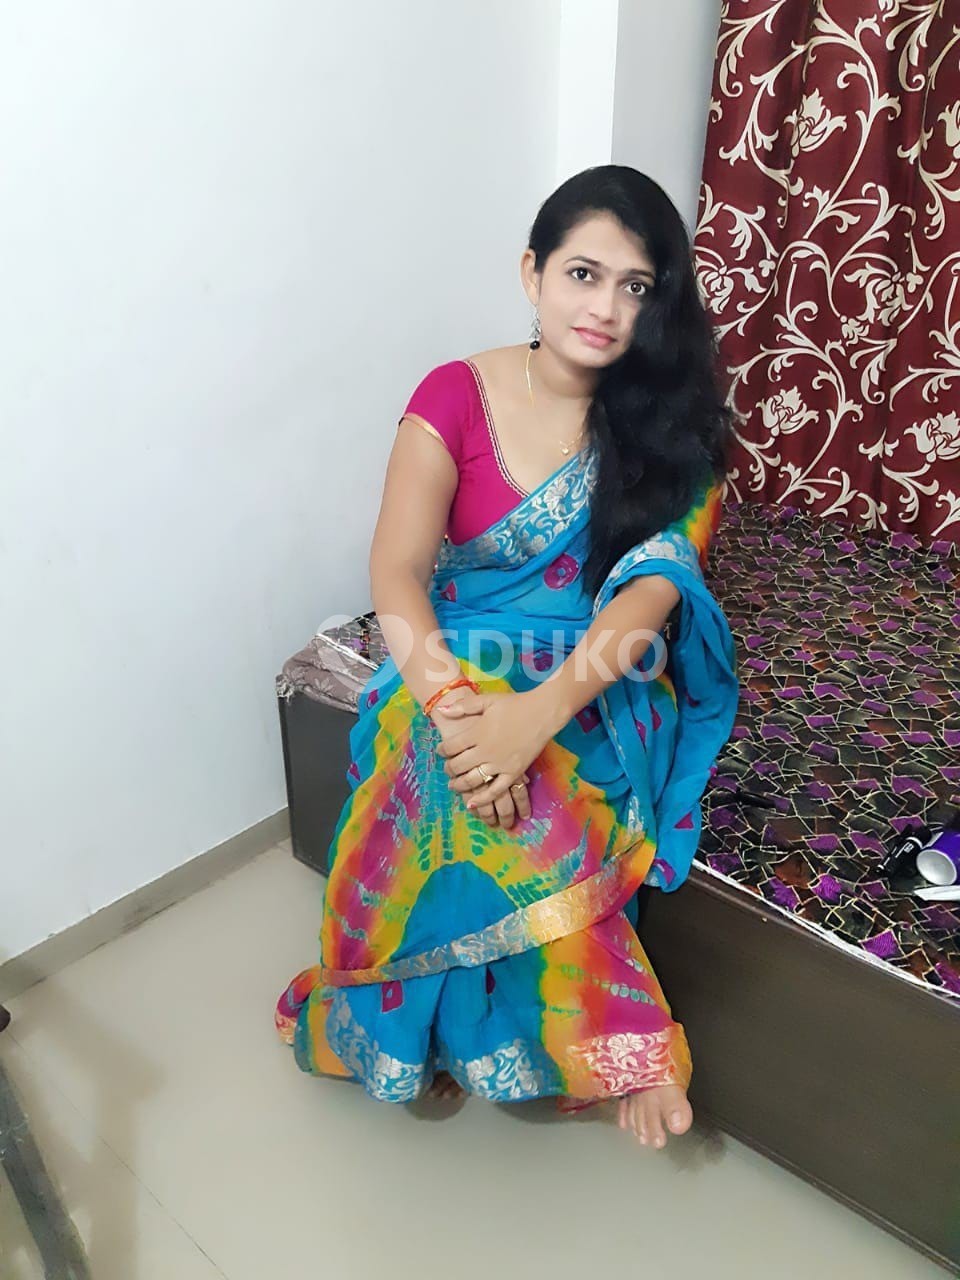 Rewa BEST DIRECT LOW PRICE BEST VIP_GENUINE_COLLEGE GIRL HOUSEWIFE AUNTIES SERVICE AVAILABLE_100% SATISFACTIONS